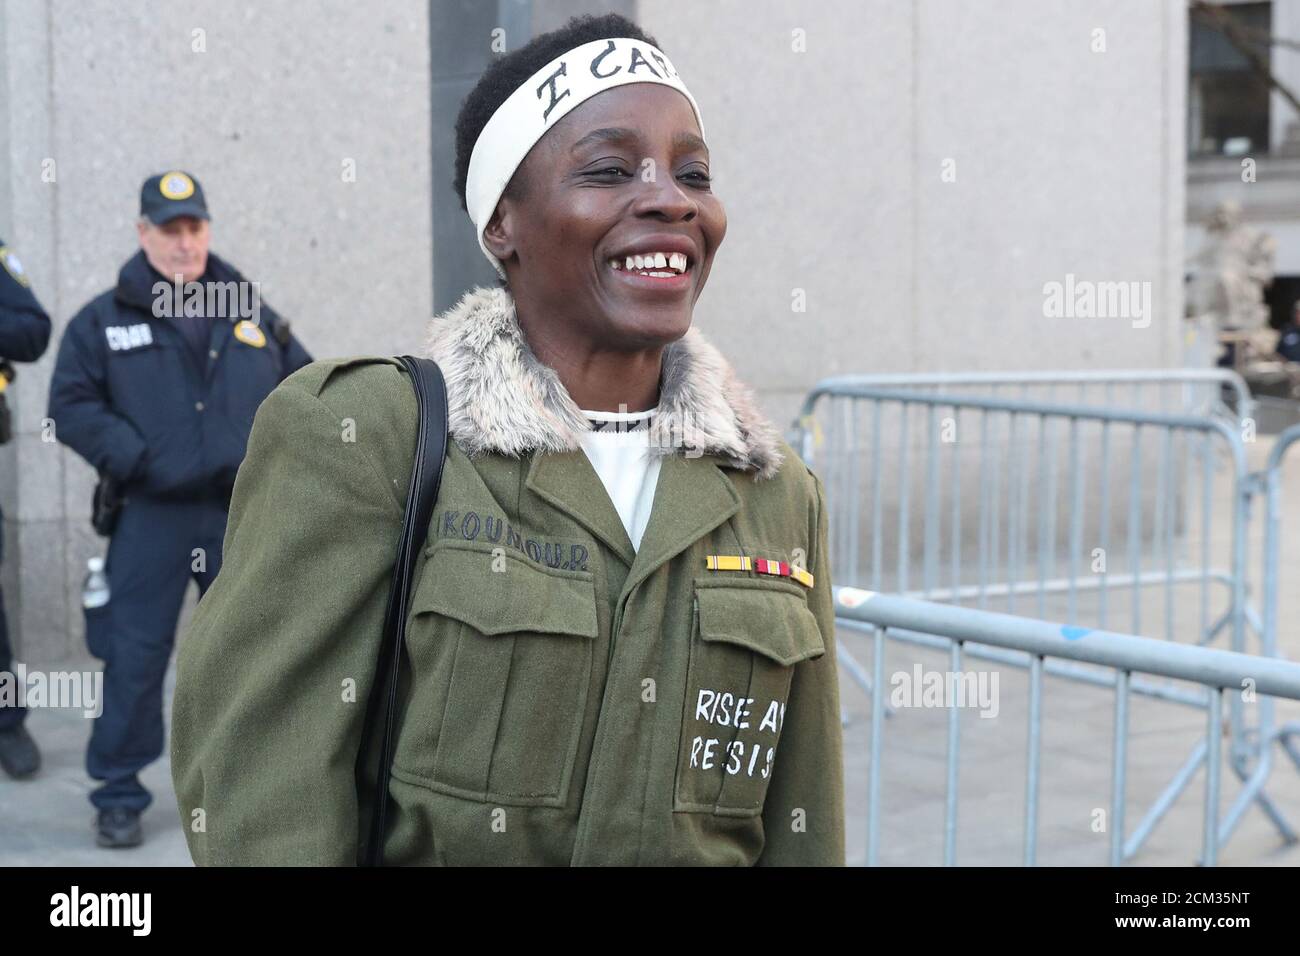 Therese Patricia Okoumou smiles after her sentencing for conviction on attempted scaling of the Statue of Liberty to protest the U.S. immigration policy, outside a federal court in New York, U.S., March 19, 2019. REUTERS/Shannon Stapleton Stock Photo